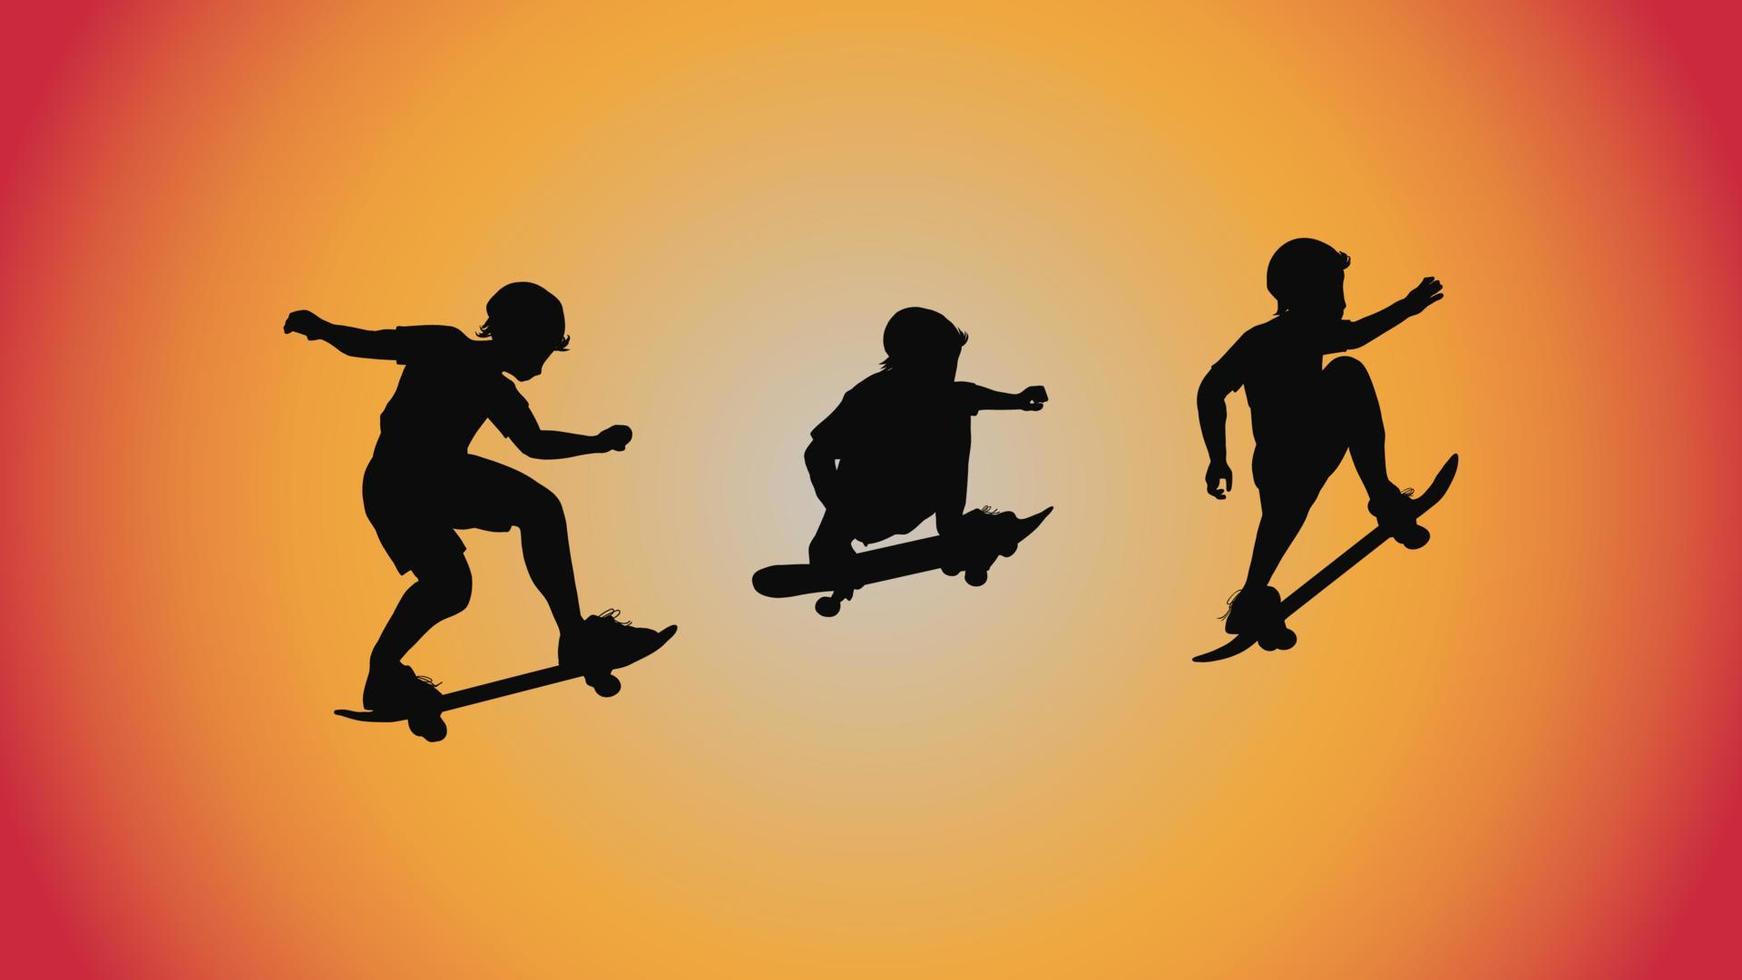 abstract background of silhouette skateboard pose move trick vector